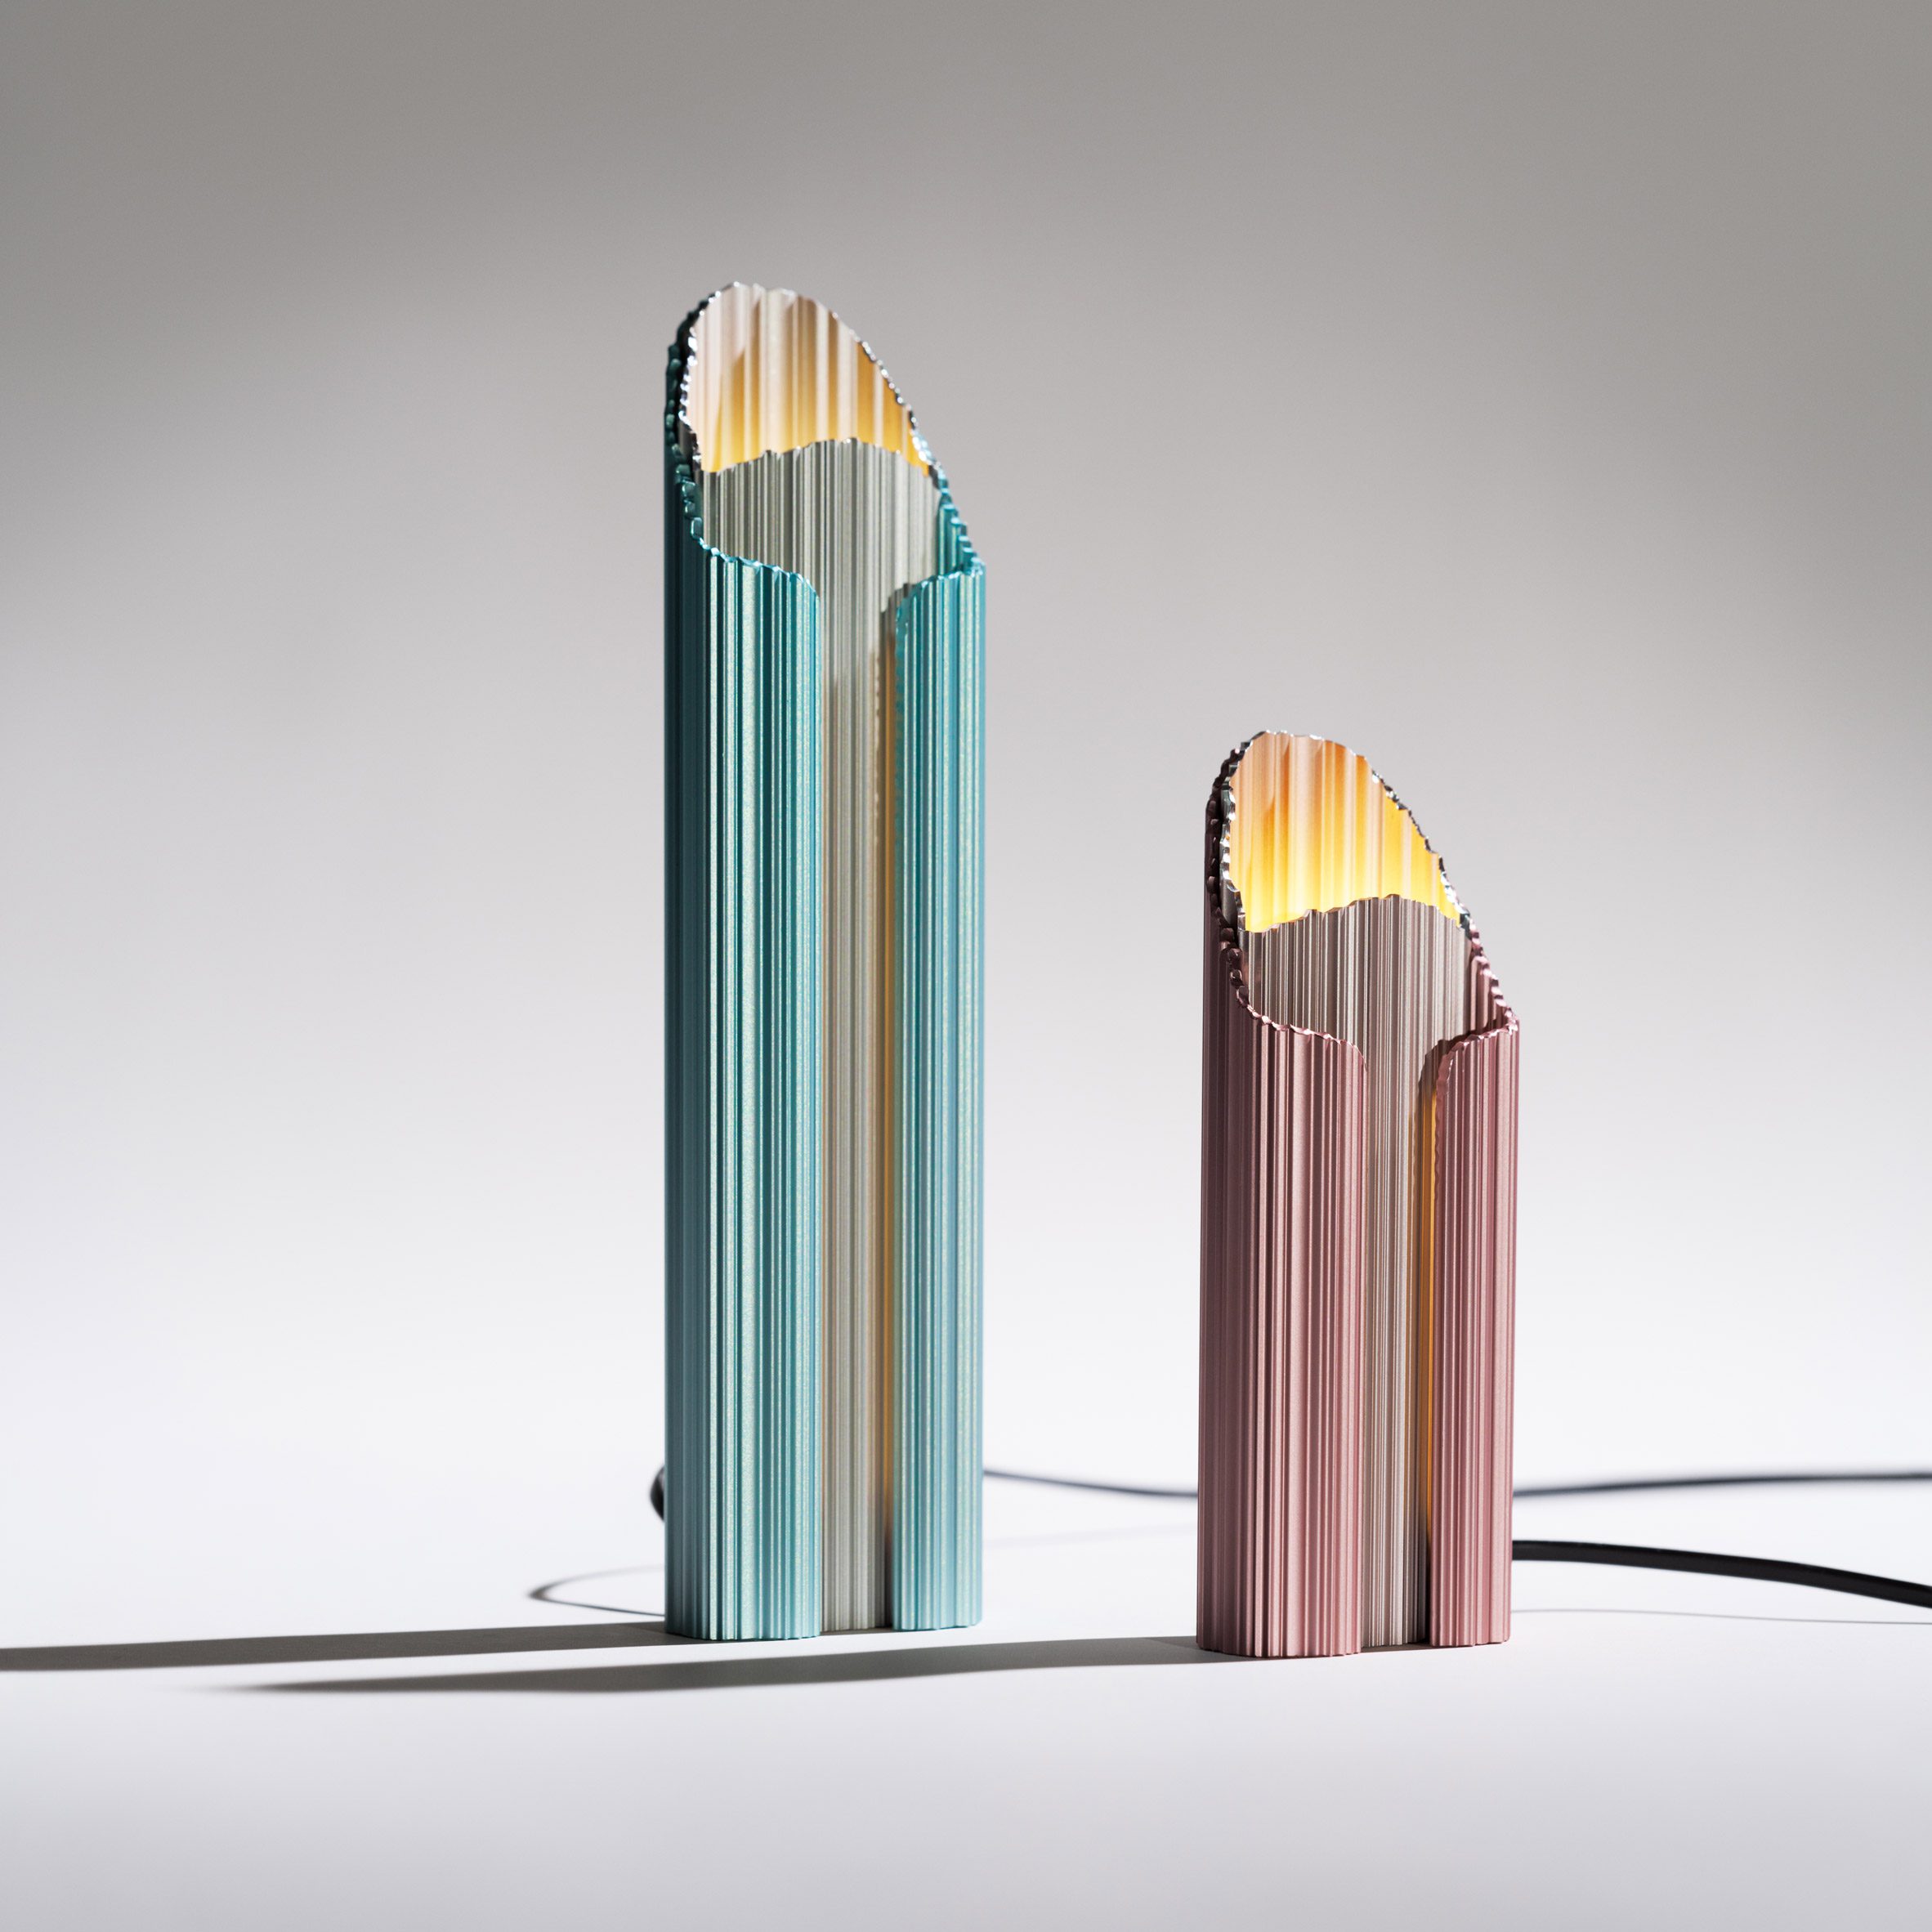 Grotte table lamps by Inga Sempé for Hydro's 100R aluminium exhibition